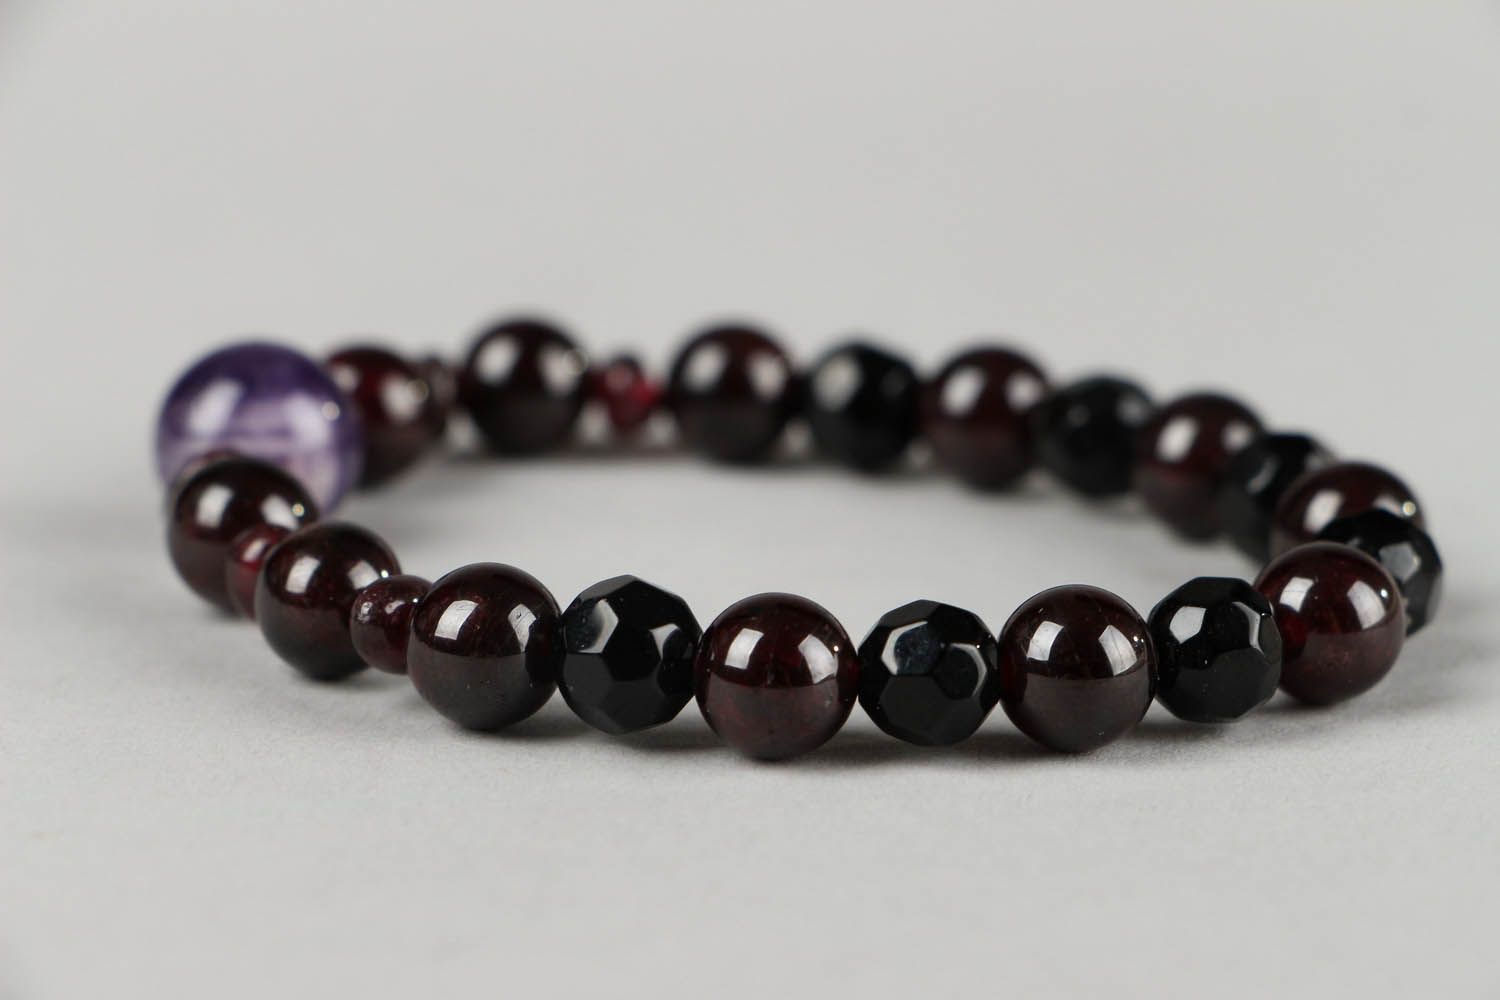 Bracelet made of glass and natural stones photo 1